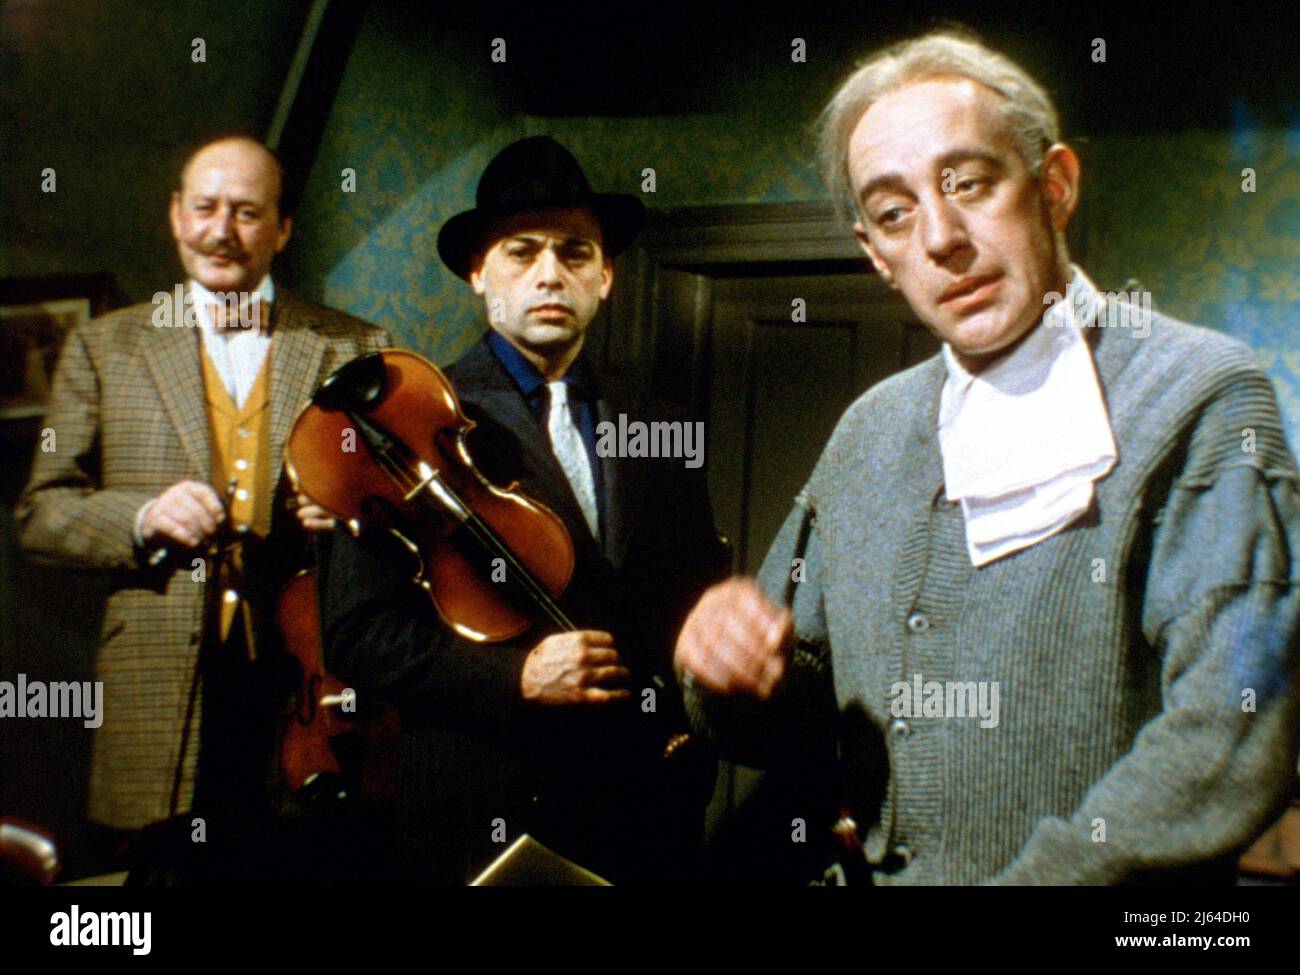 CECIL PARKER, HERBERT LOM, ALEC GUINNESS, THE LADYKILLERS, 1955 Stock Photo